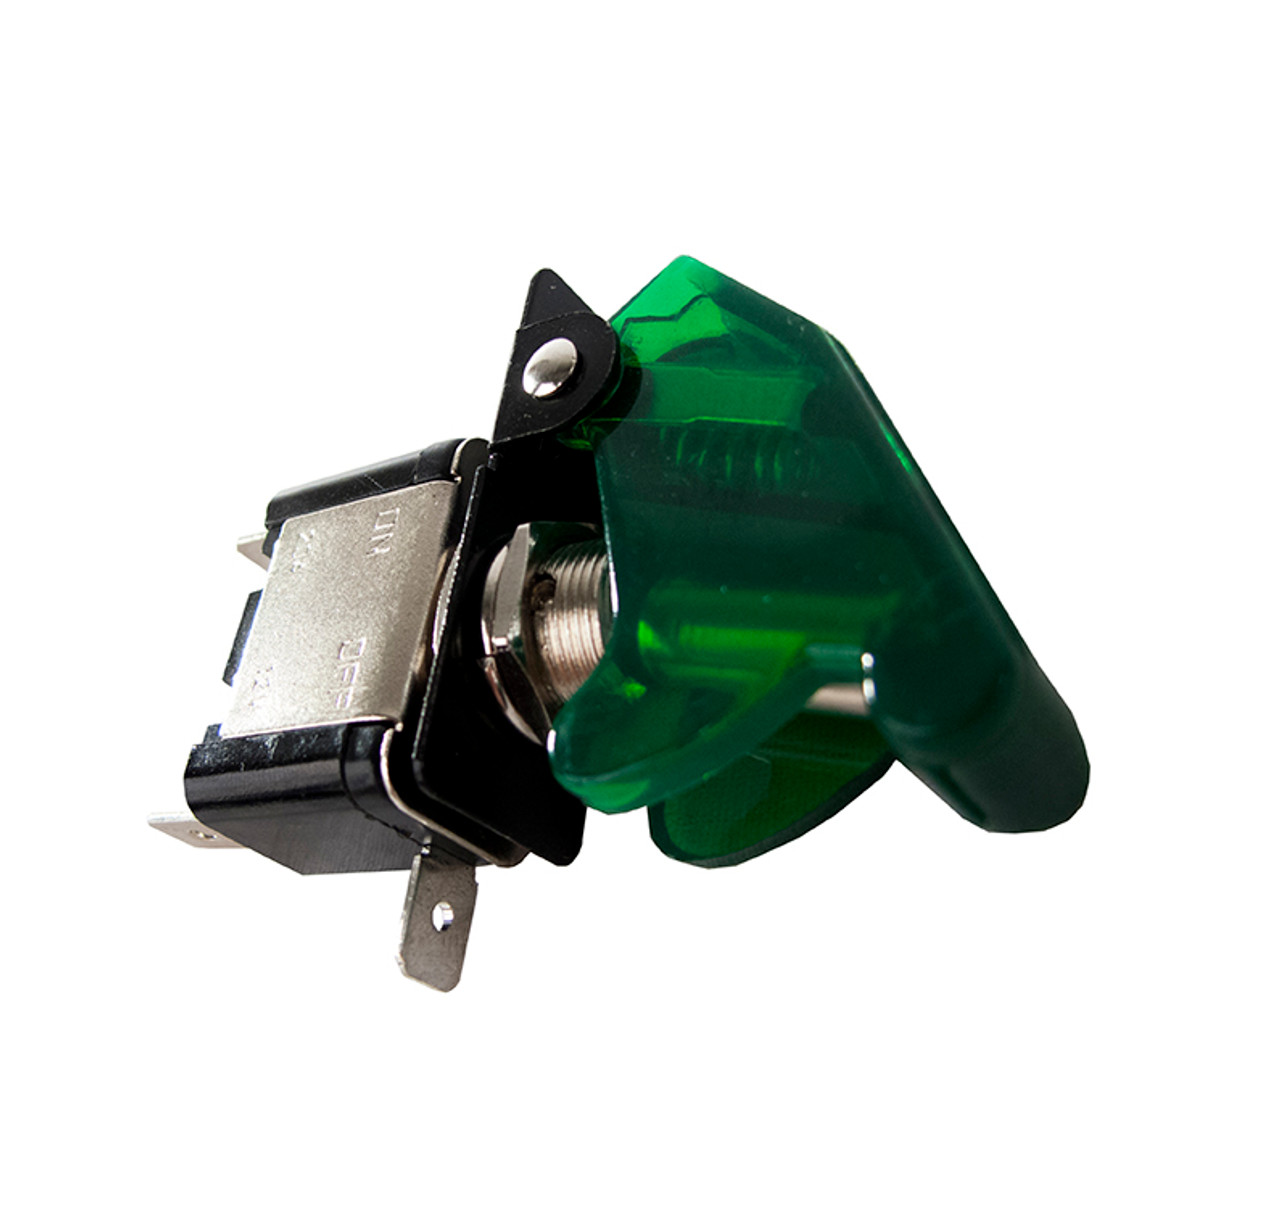 12 Volt LED Toggle Switch Green Spring Loaded Safety Cover Race Sport Lighting